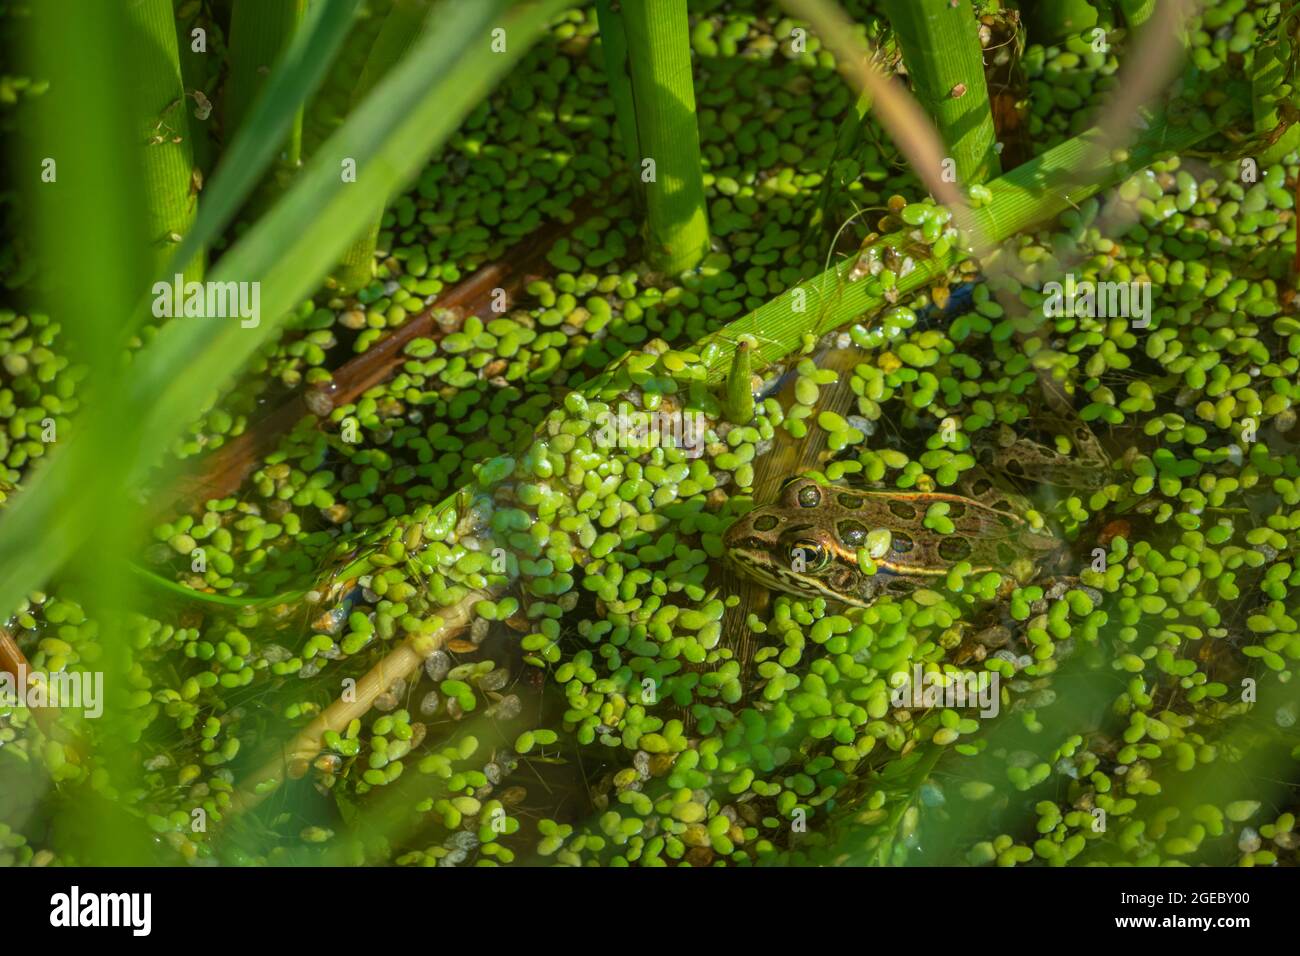 Young Plains Leopard Frog (Lithobates blairi- formerly Rana blairi), hides among duckweed in wetlands cattail marsh, Castle Rock Colorado USA. Stock Photo